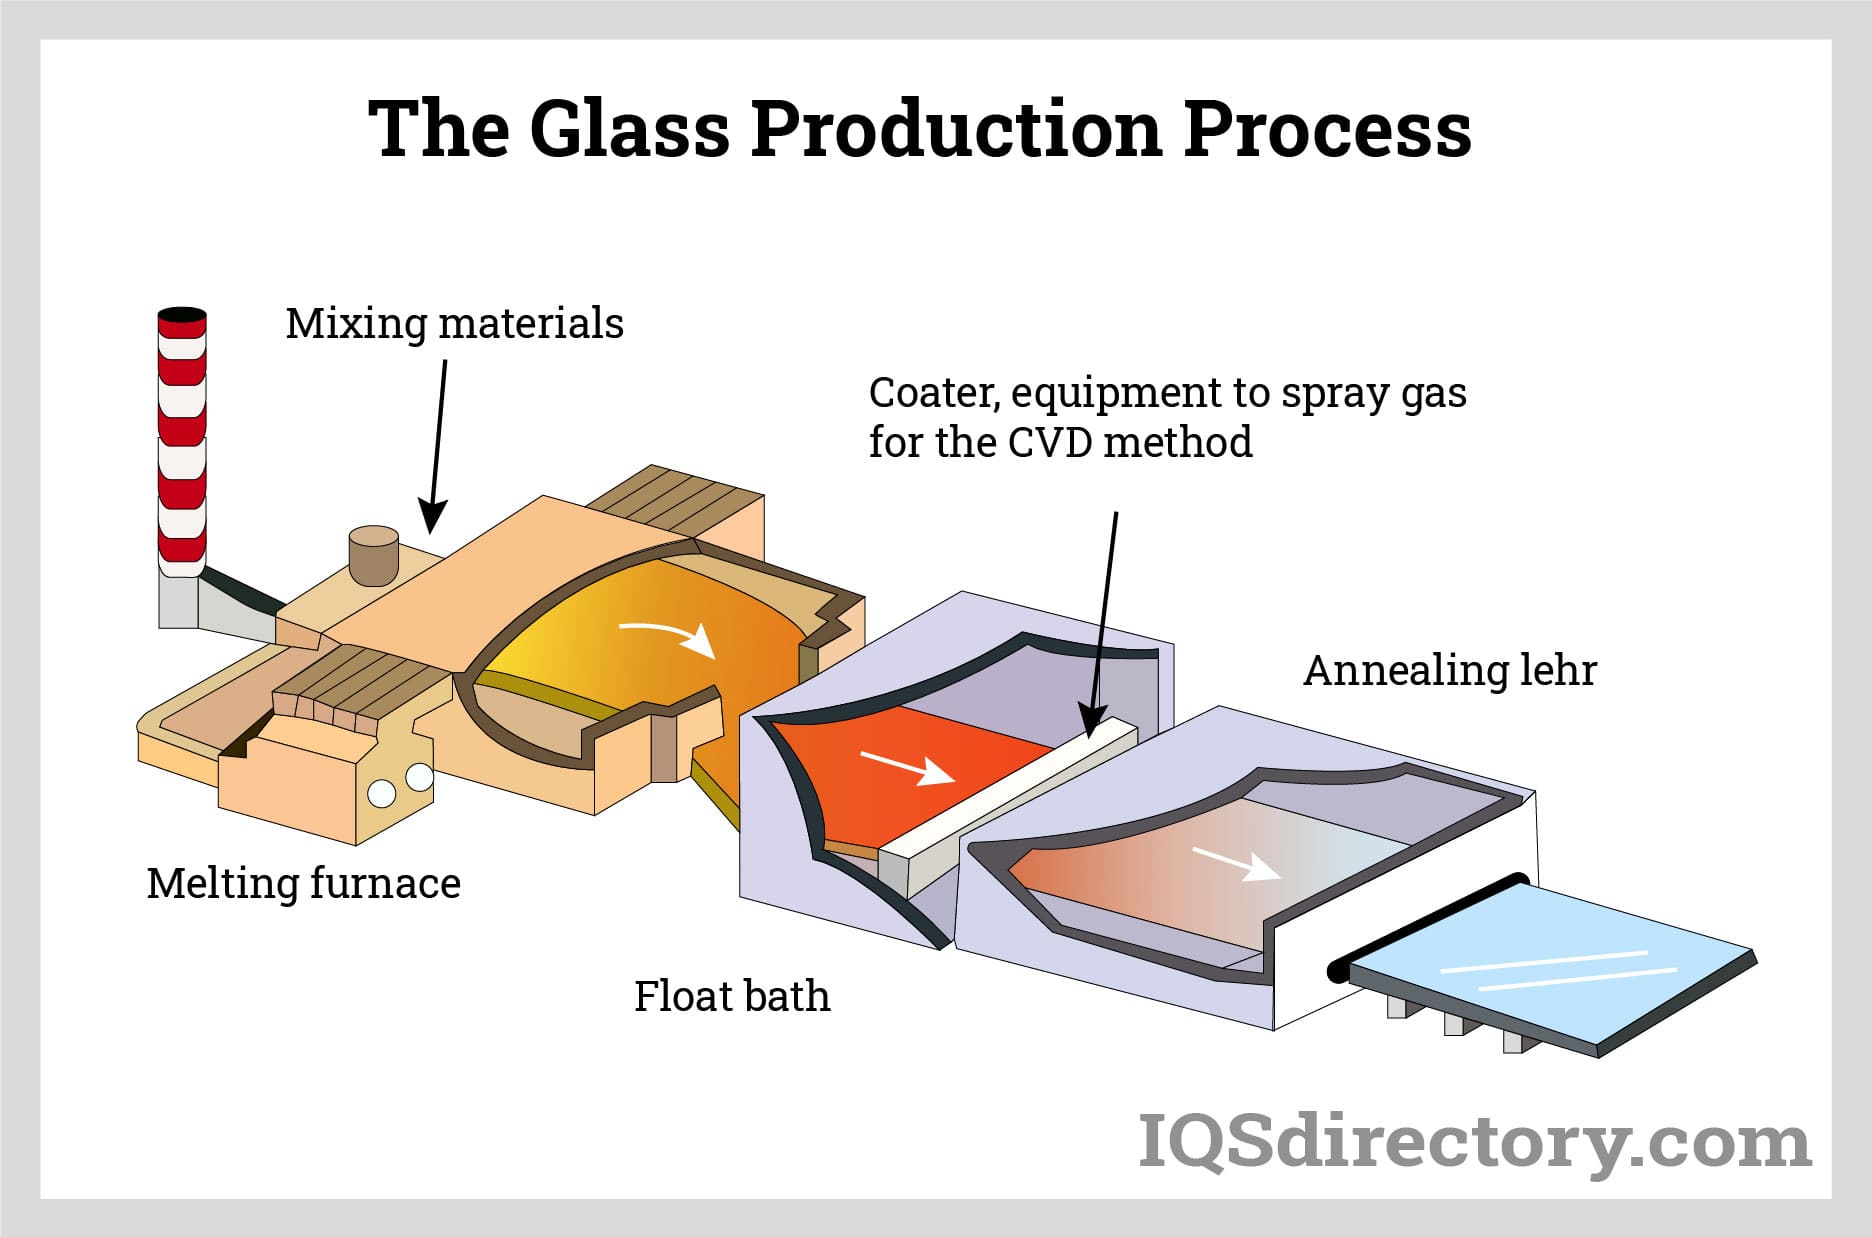 The Glass Production Process